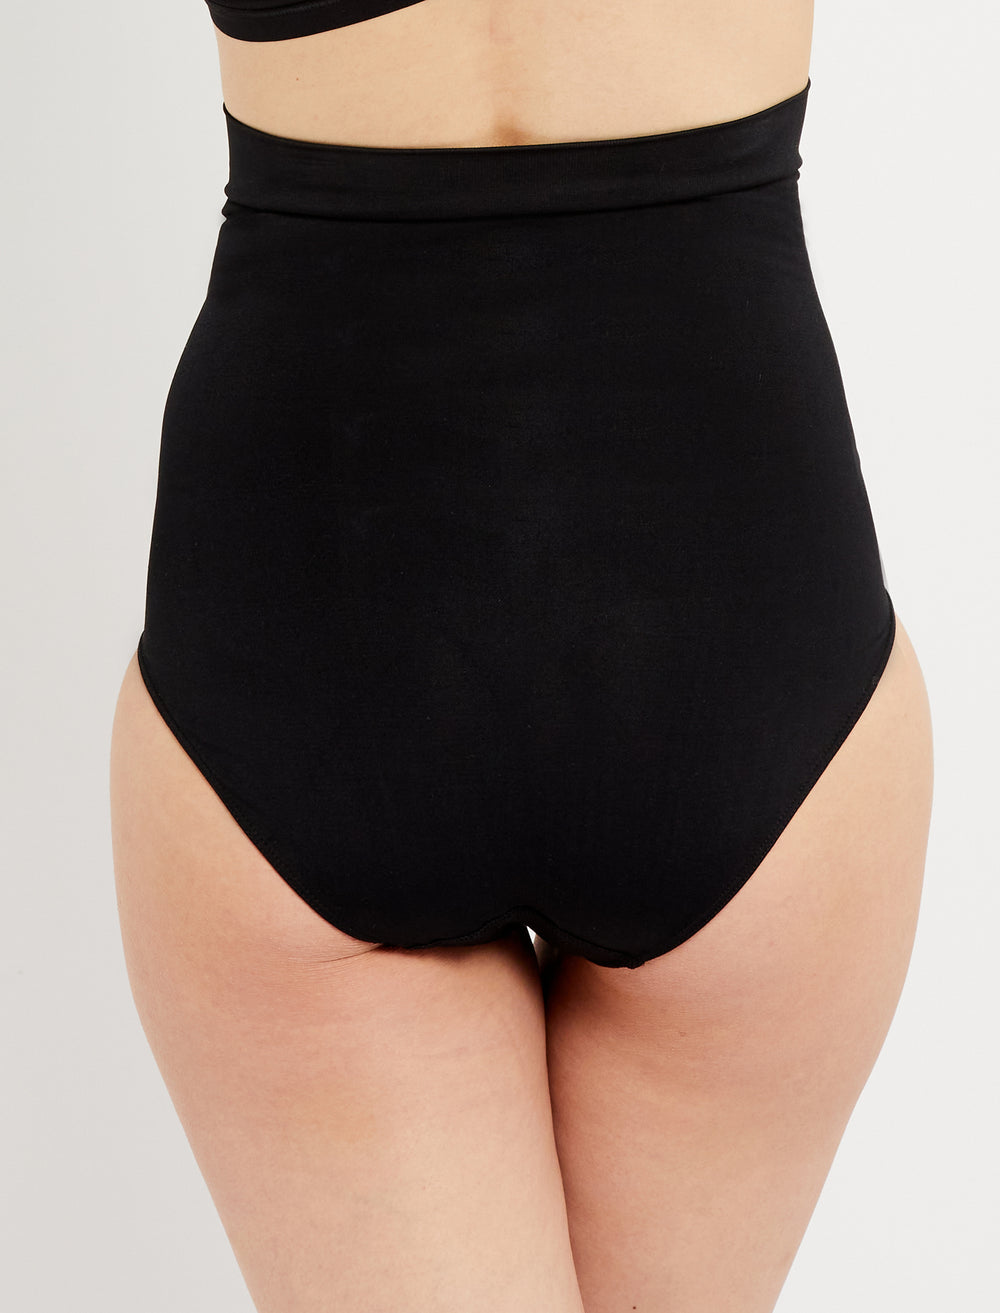 UpSpring C-Panty For C-Section Recovery Black Size S/M